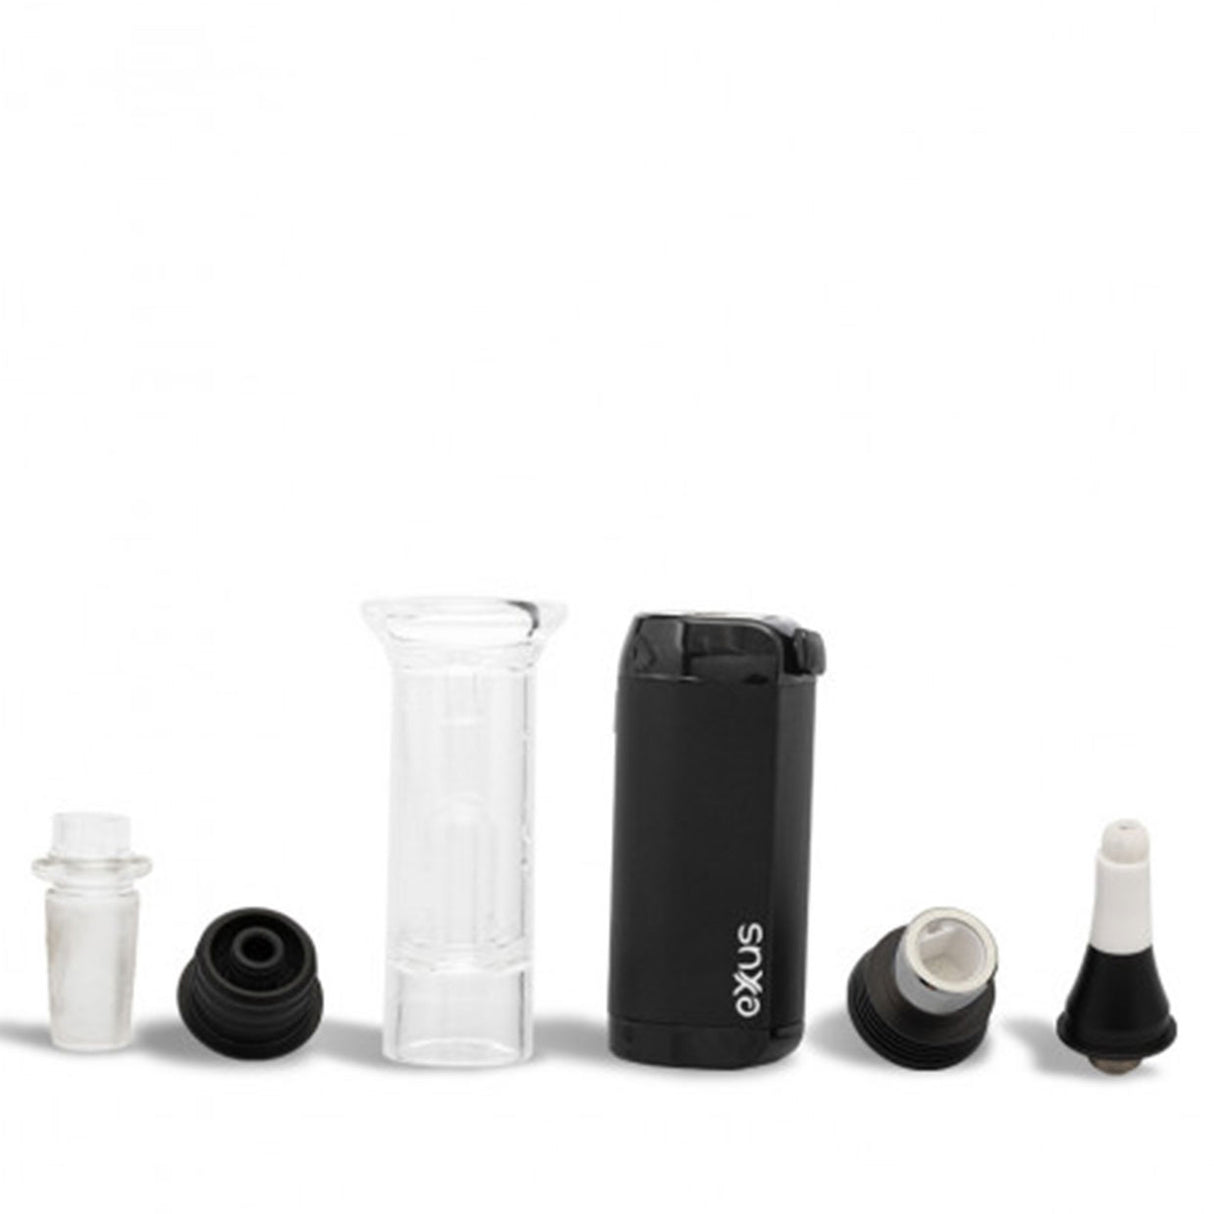 Black Exxus VRS Vaporizer Kit with Nectar Collector Mode, Dab Rig Mode, Cartridge Mode Comes with carrying pouch 19